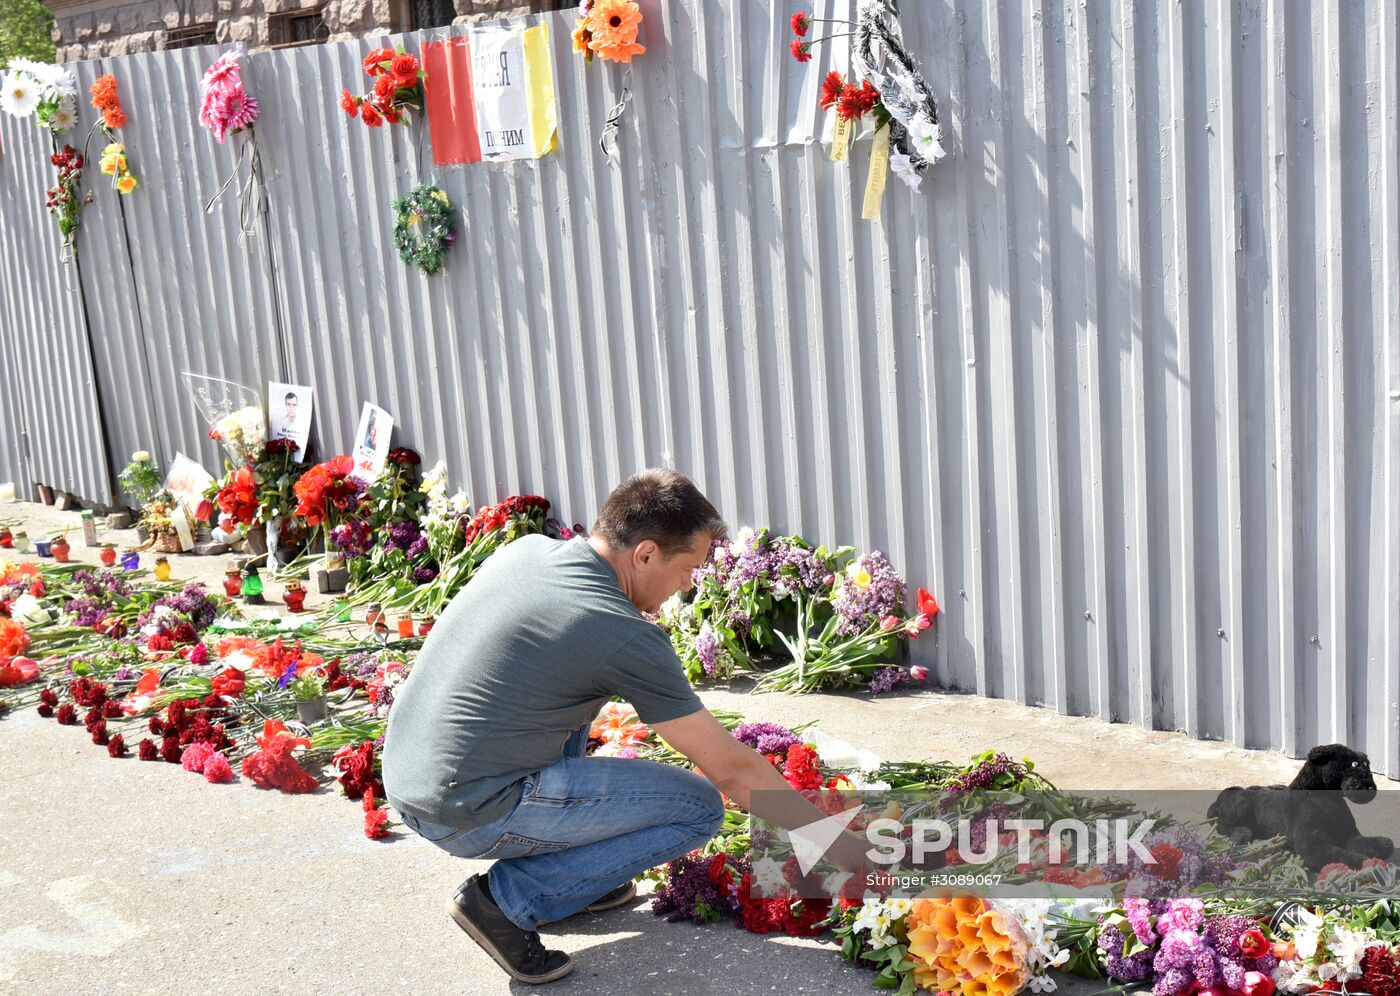 Remembering those killed May 2, 2014 in Odessa